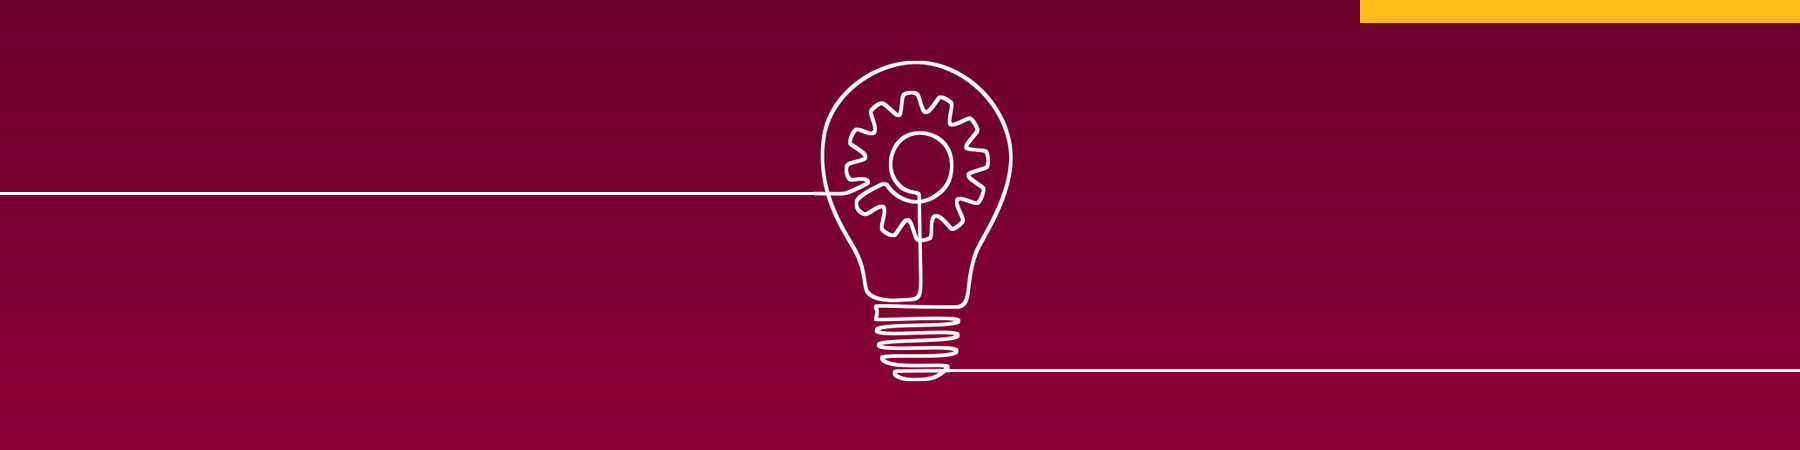 White line illustration of a lightbulb, against a maroon background, to demonstrate Loyola University Chicago's creative and design work.